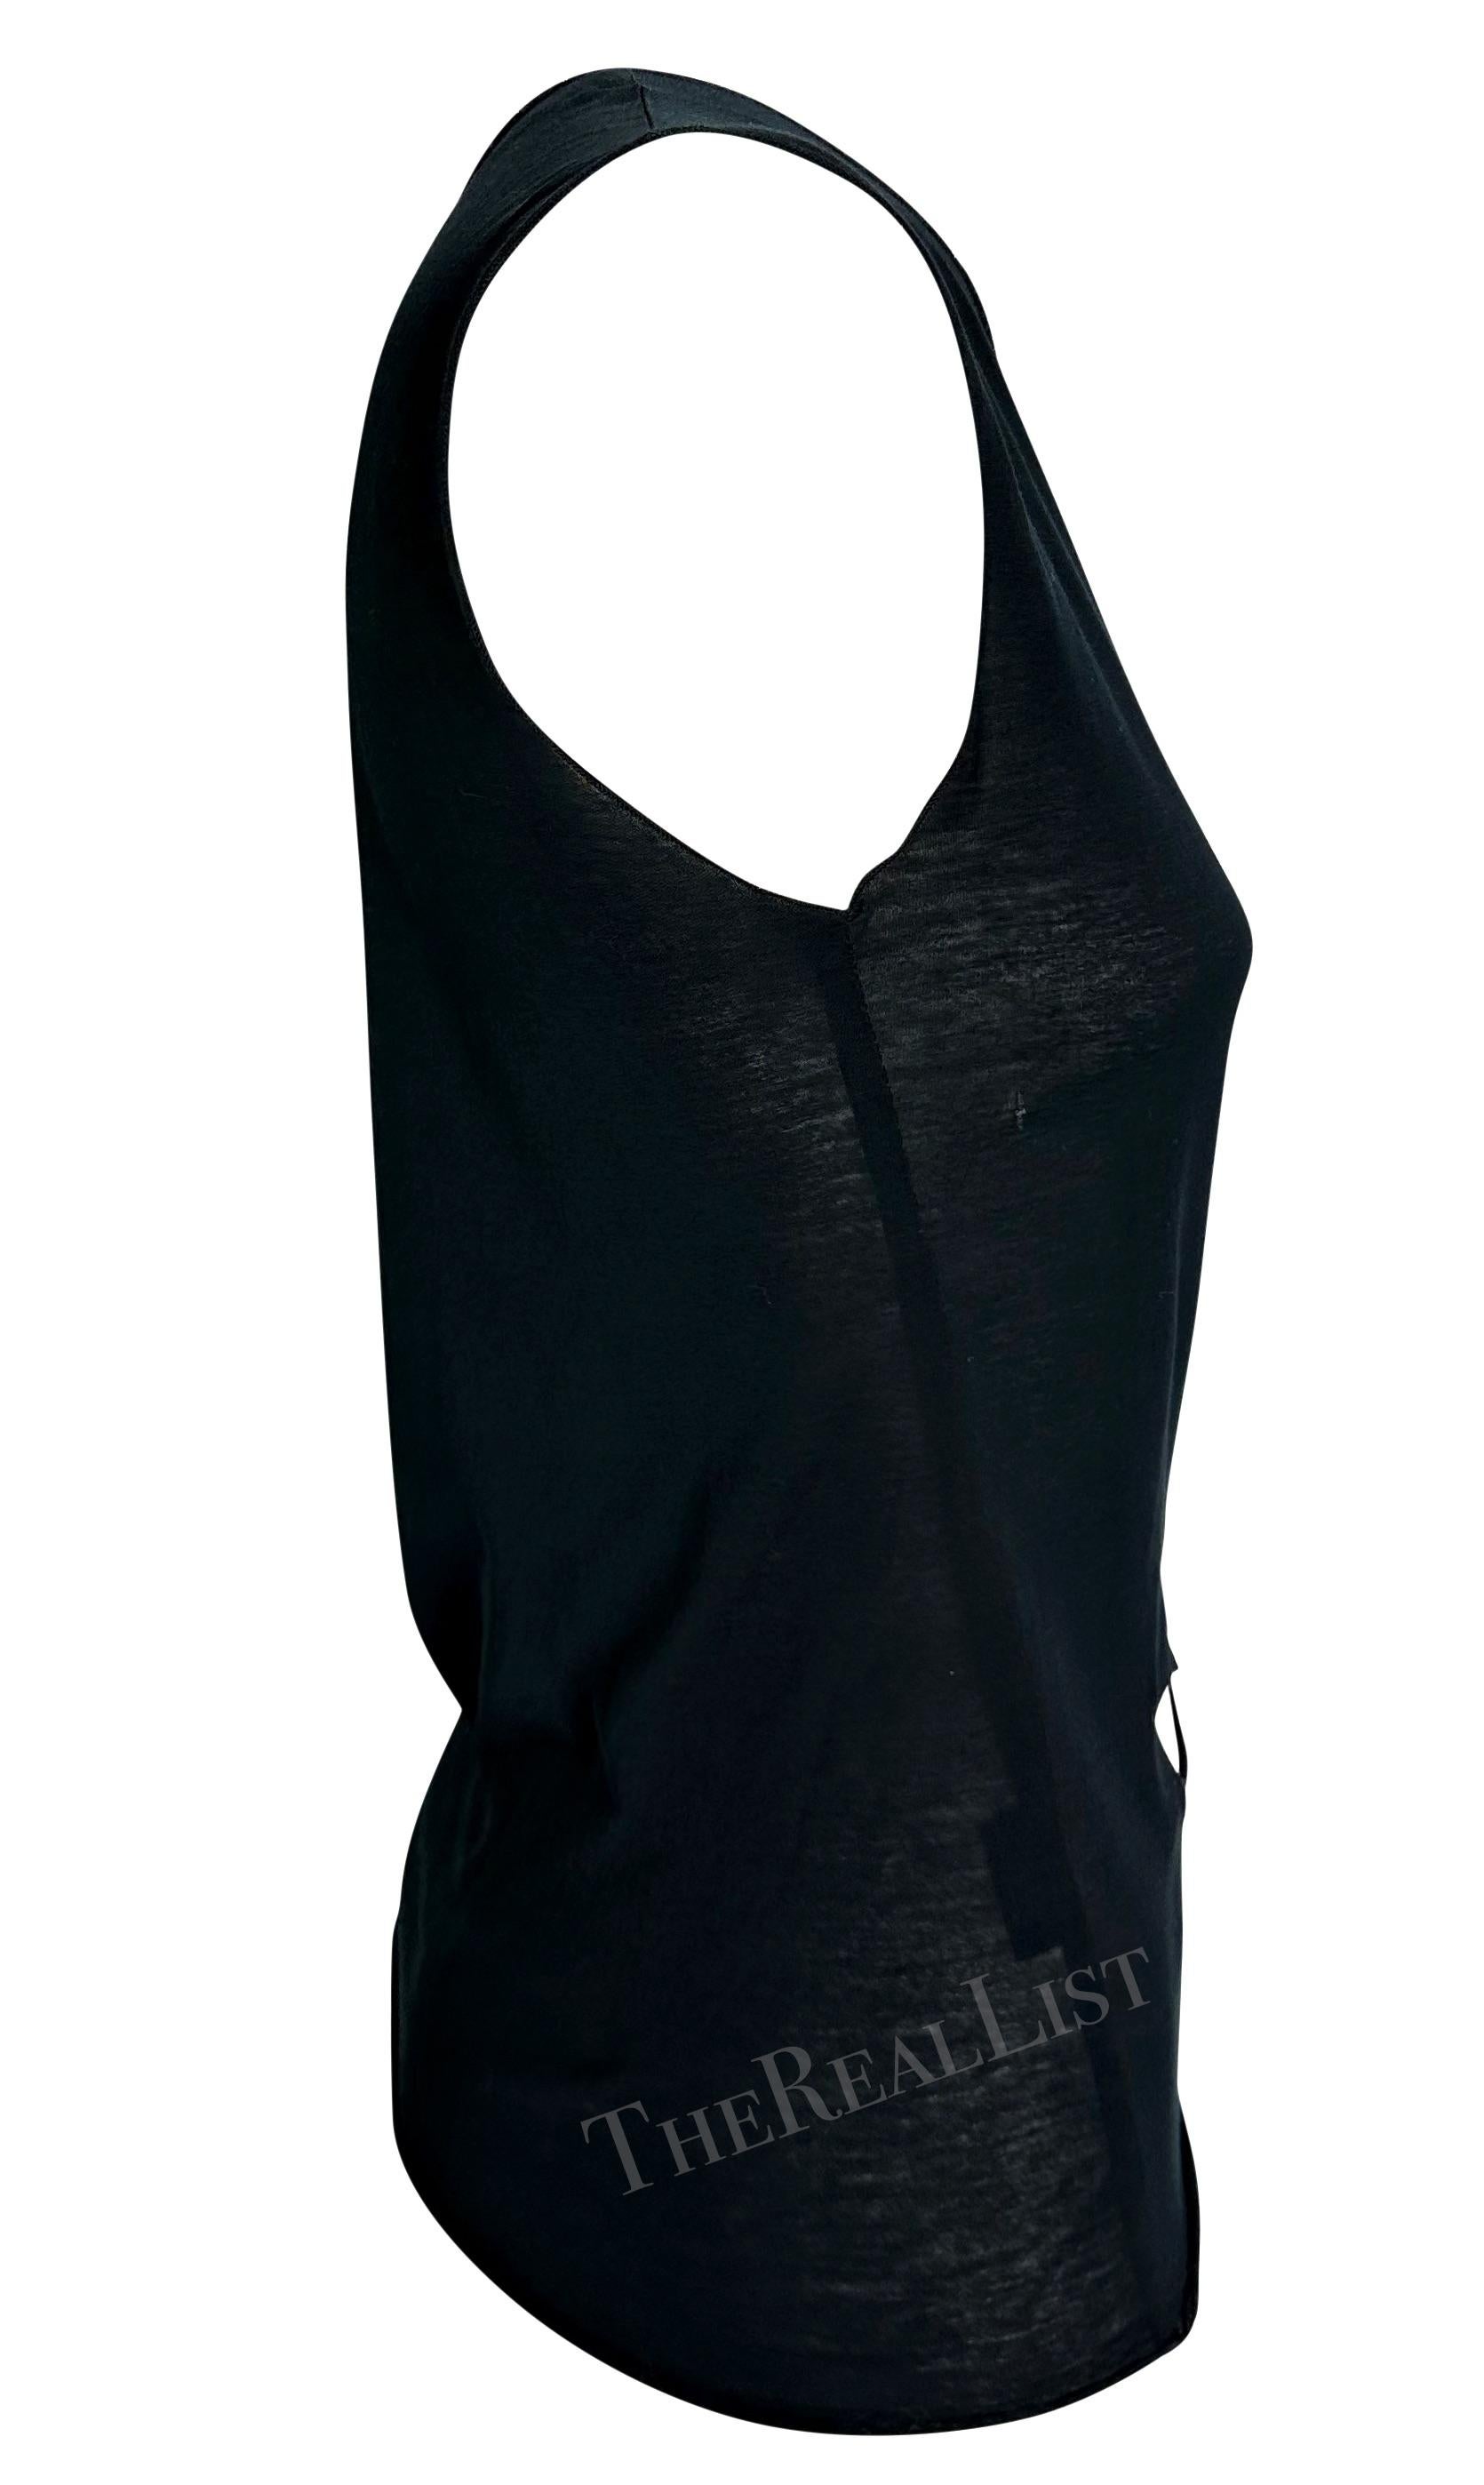 S/S 2002 Gucci by Tom Ford Runway Heart Cutout Black Sheer Tank Top For Sale 3